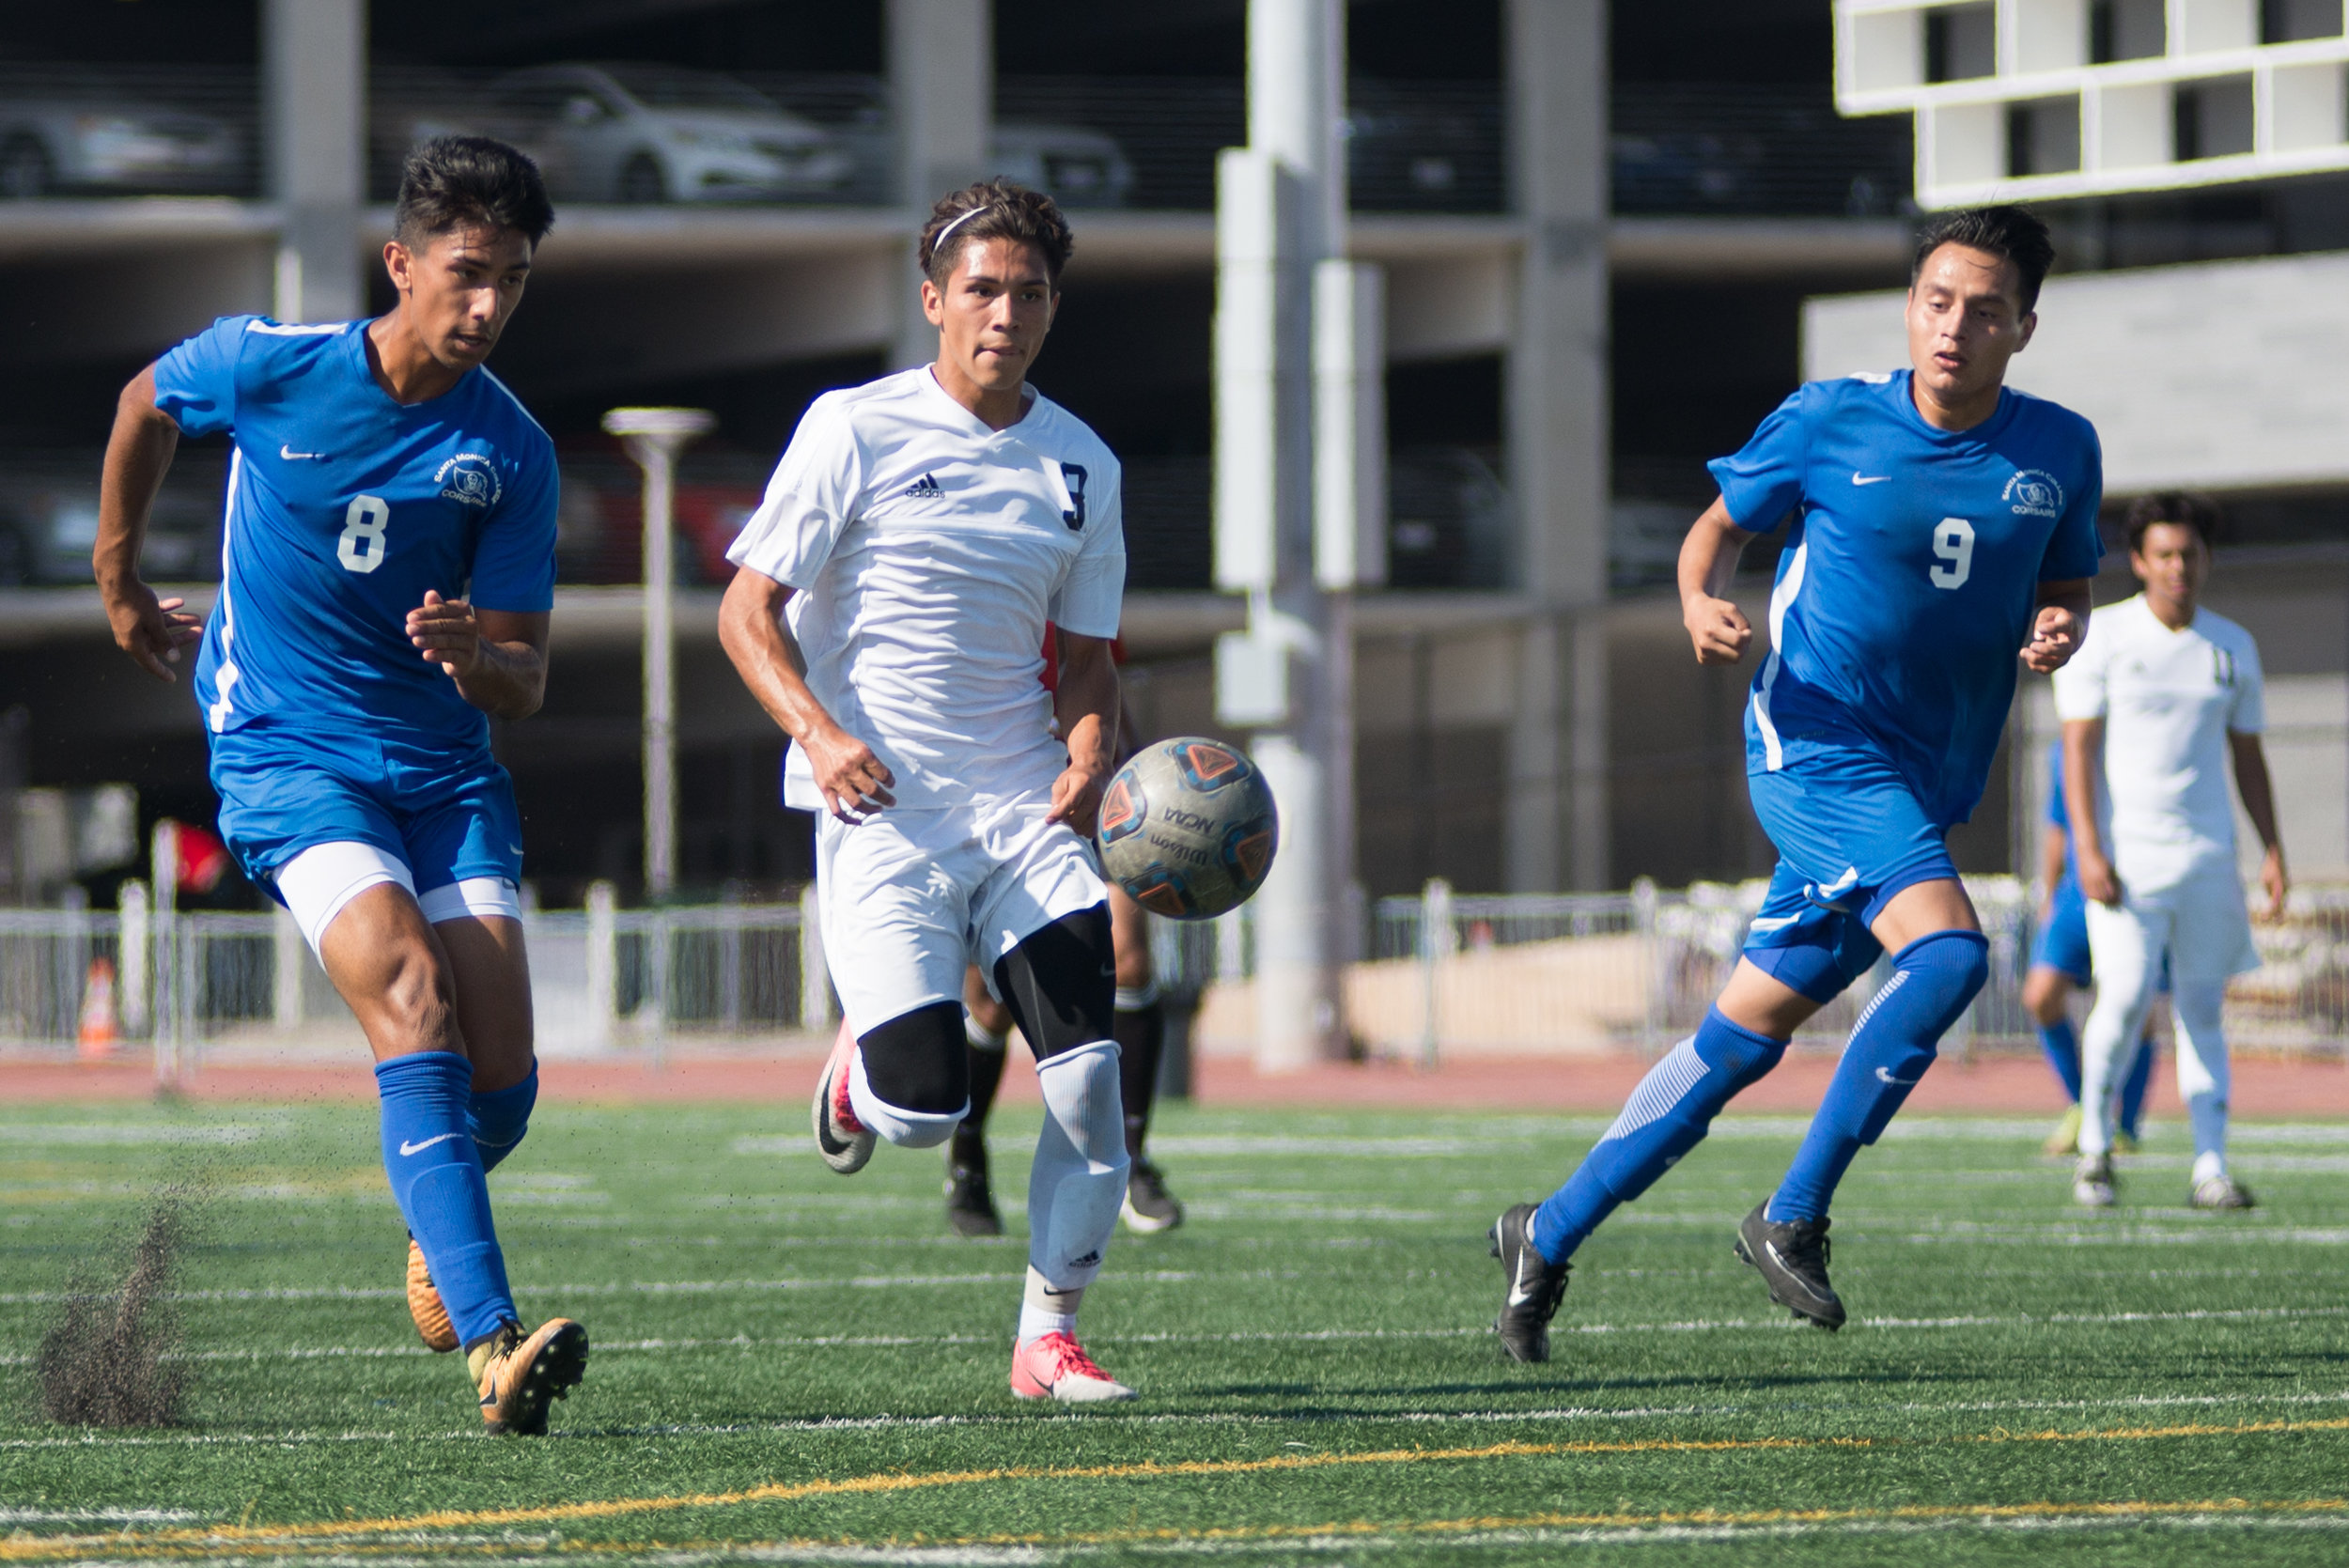  Santa Monica College Corsair Andy Naidu (8) (L) kicks and scores a goal against Citrus College Owls on Tuesday September 26, 2017 on the Corsair Field at Santa Monica College in Santa Monica, California. The Corsairs tied the game 1-1. (Josue Martin